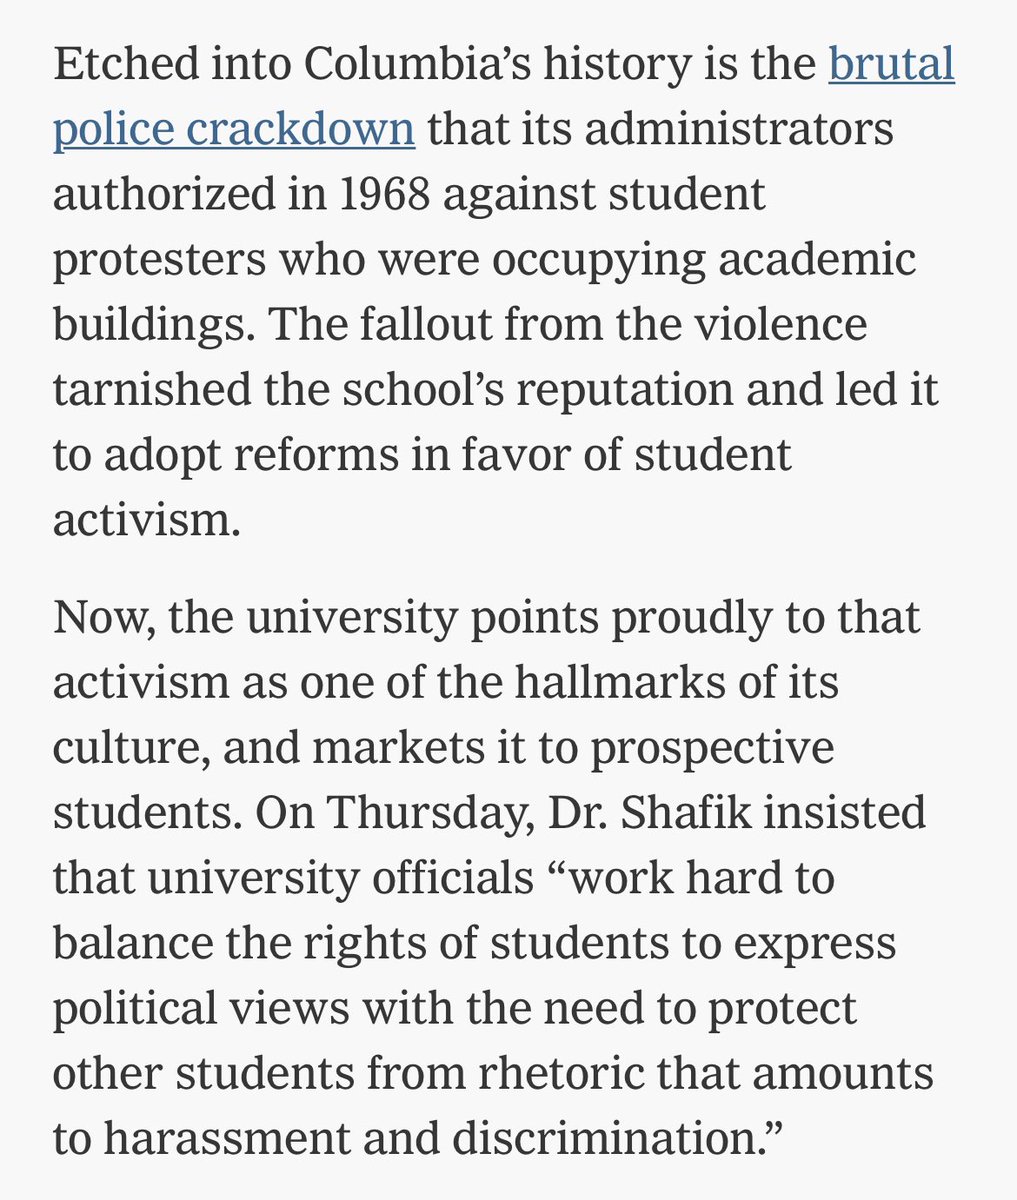 You can’t have it both ways, Columbia. You can’t proudly tout activism and protest as vital to the core of Columbia culture but then not hesitate to repeat the crackdown in ‘68 by utilizing police to mass arrest your students who are PEACEFULLY protesting